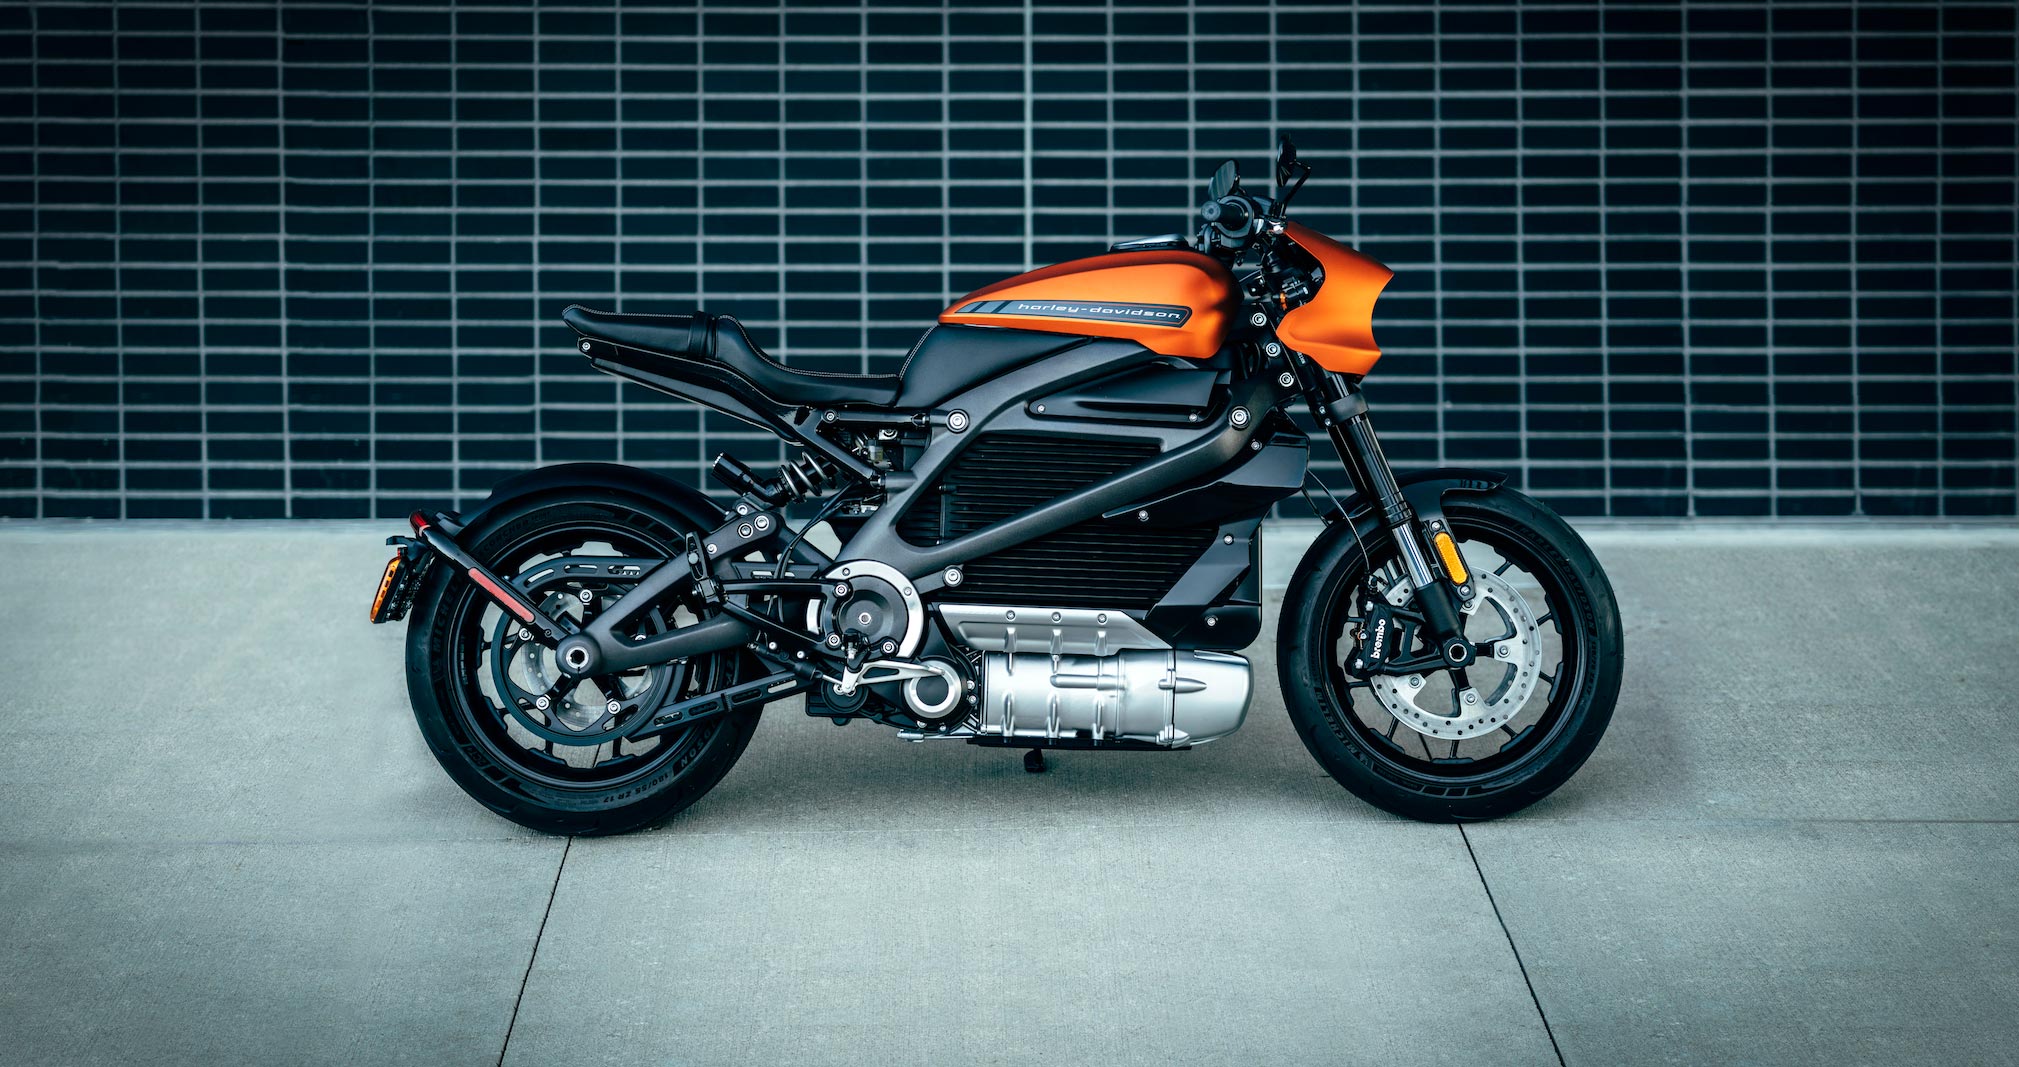  2019  Harley  Davidson  LiveWire Guide  Total Motorcycle 